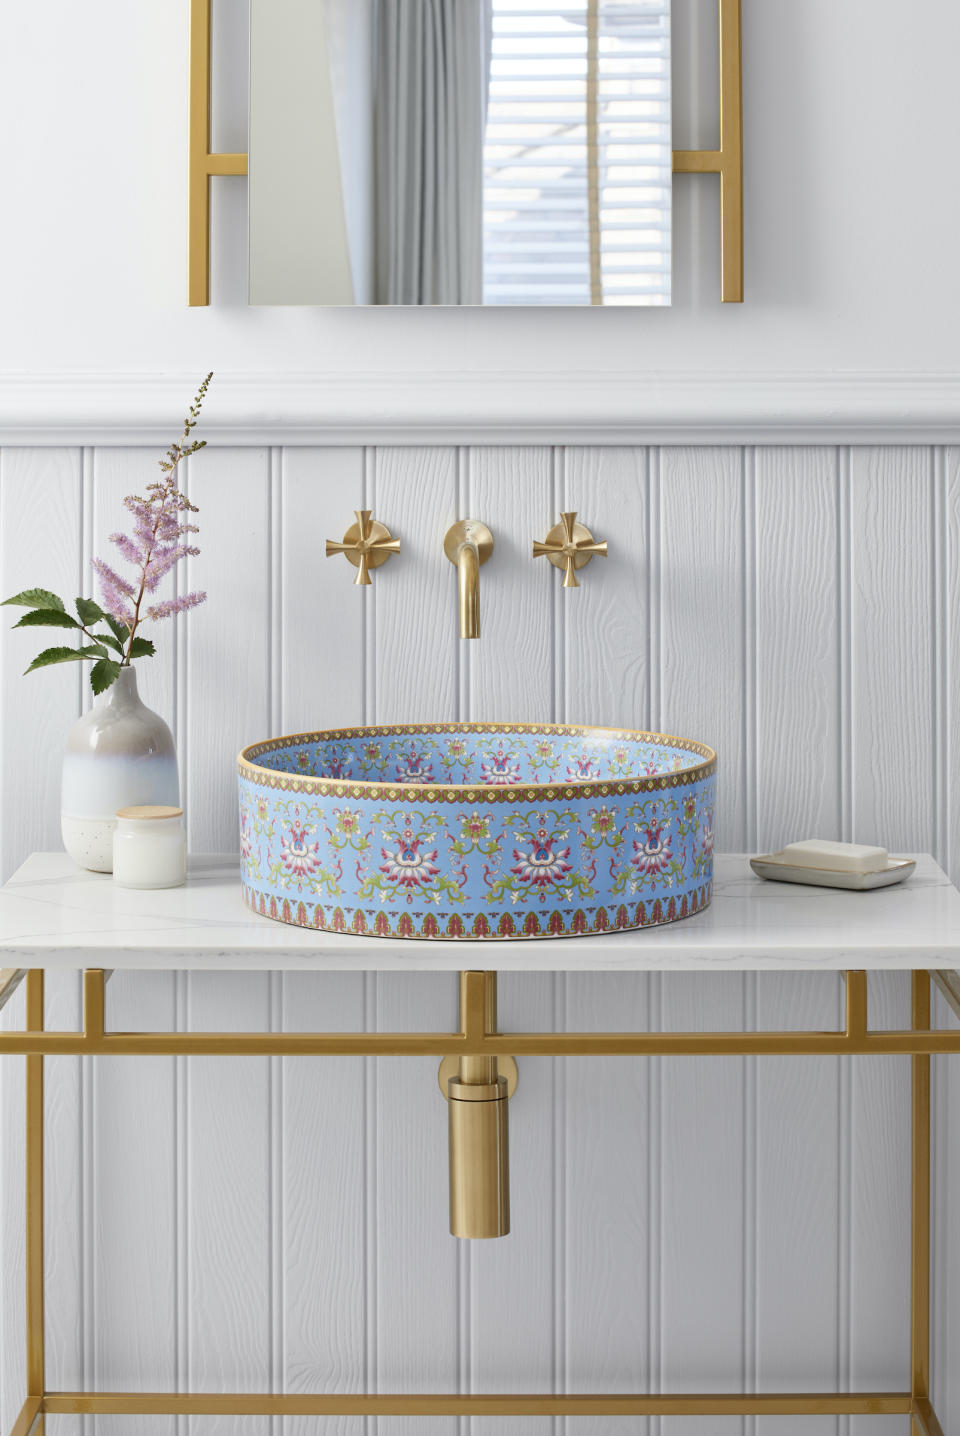 <p> A decorative basin will add a unique touch to your country bathroom ideas, especially when complemented with elegant brushed brass faucets and metalwork. </p> <p> 'Bold, vibrant and full of character, our Blue Marnie basin is well suited to country style interiors,' says Anna Callis, Founder and Designer, London Basin Company. 'Its joyful color palette of pinks, blues and greens is inspired by the natural world, helping to bring a sense of the outdoors. And its delicate floral pattern brings a botanical feel to the design.' </p>